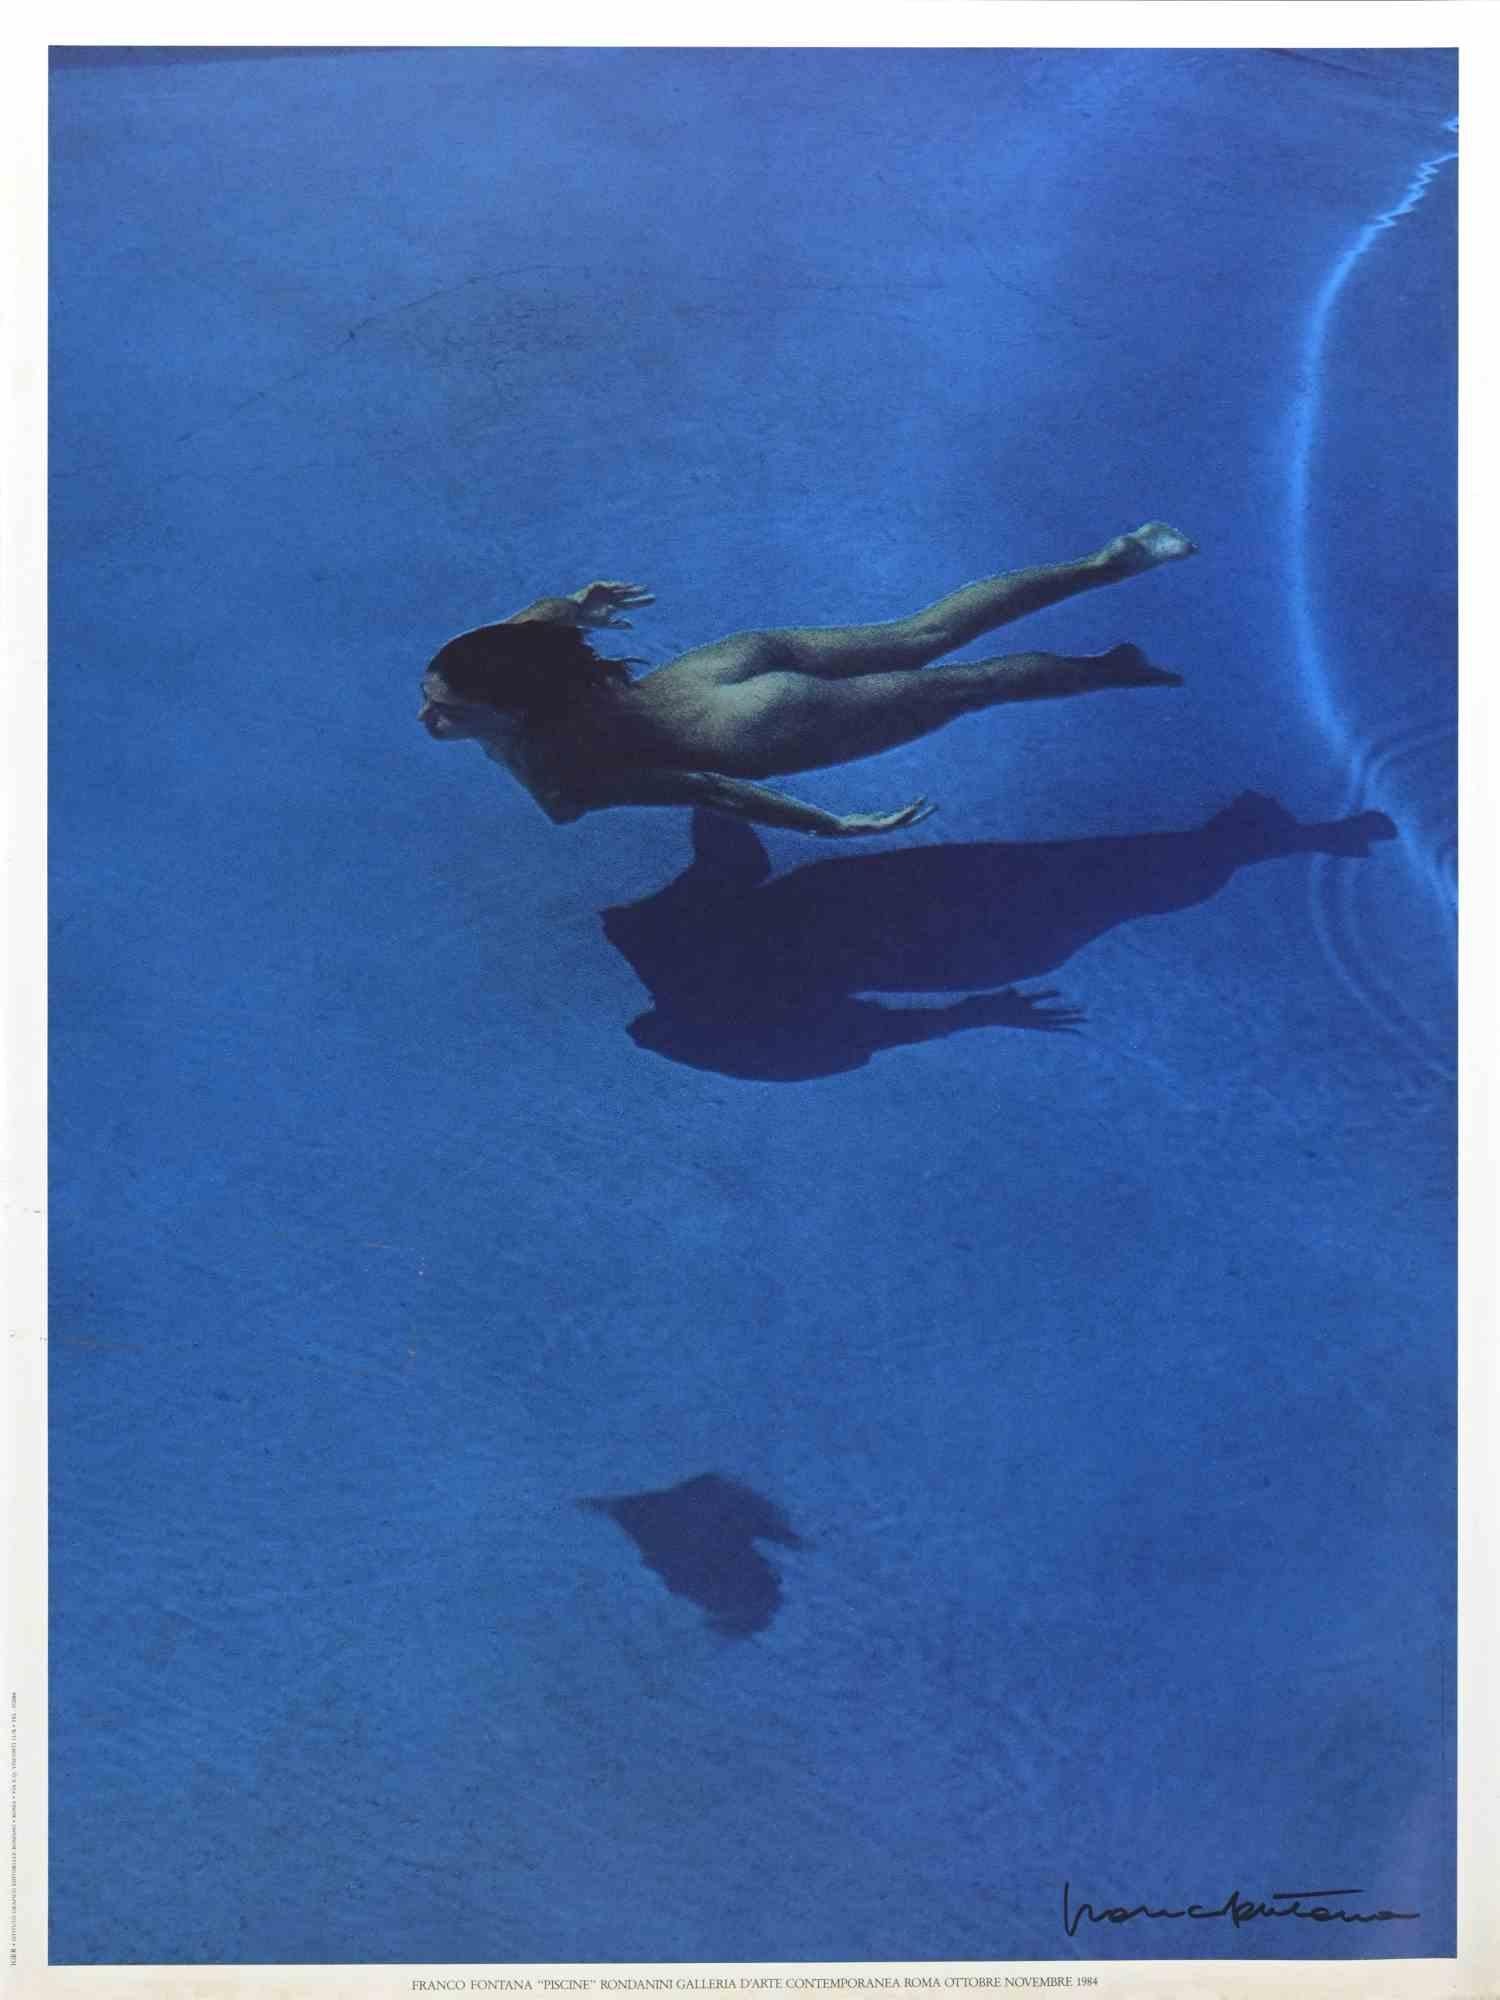 Franco Fontana Landscape Print - Swimming Pools - Vintage Offset Poster by Hand Signed by F.  Fontana - 1984